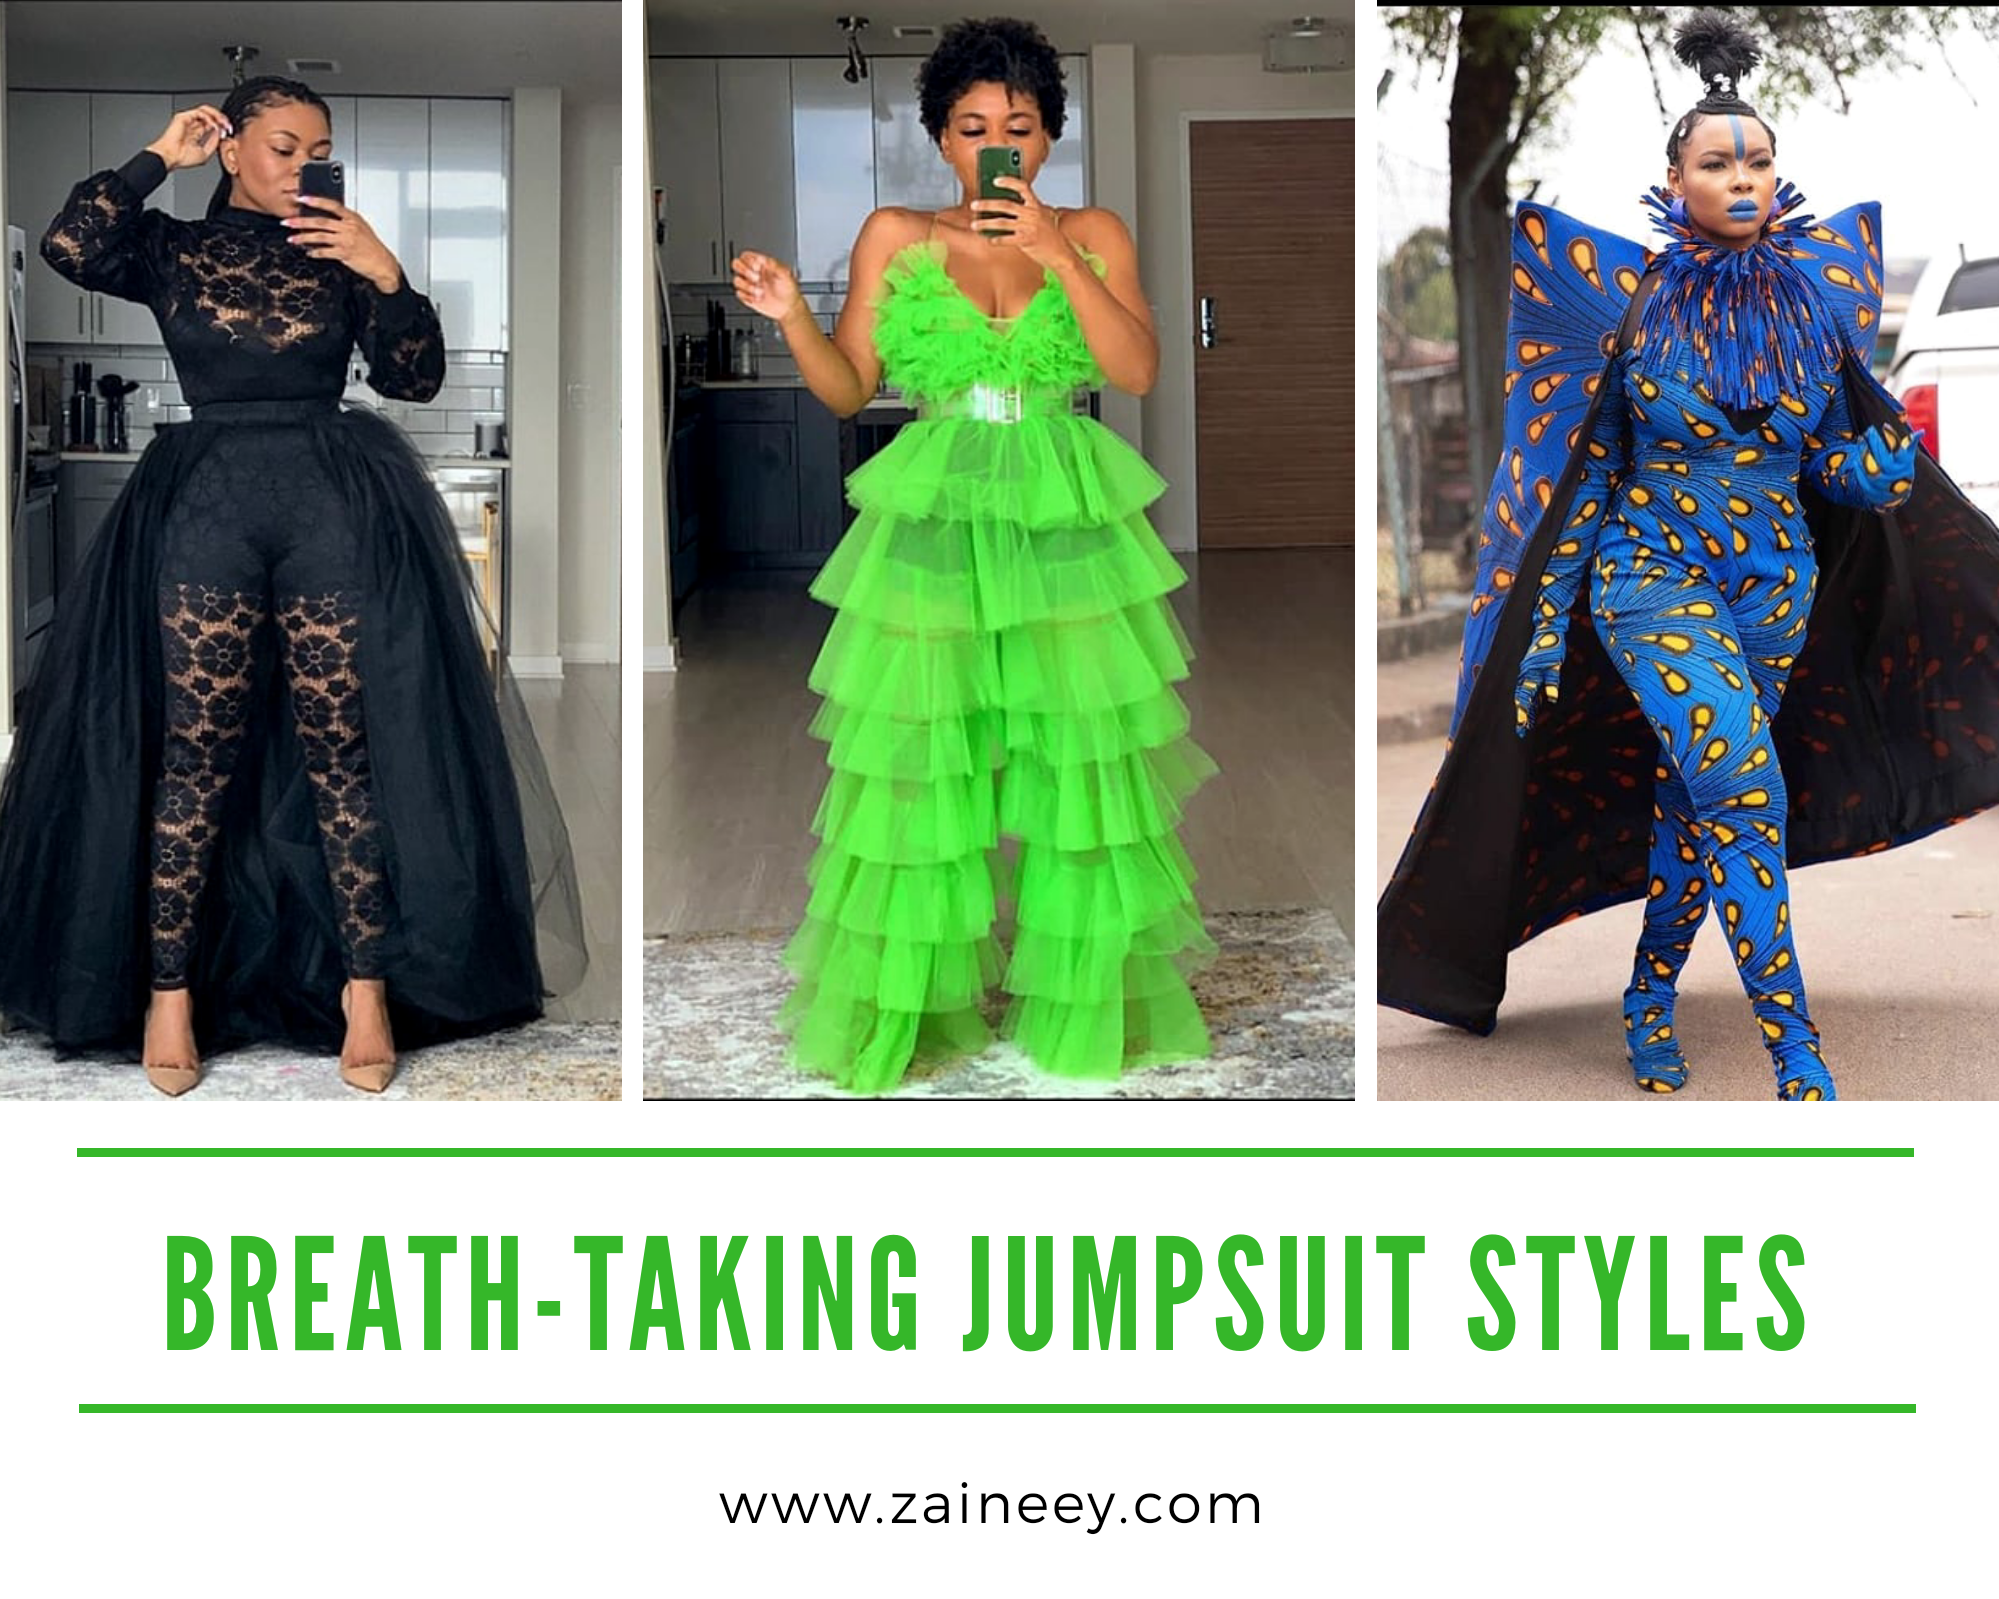 Jumpsuit styles: Eye-popping and breath-taking Jumpsuit styles to try out